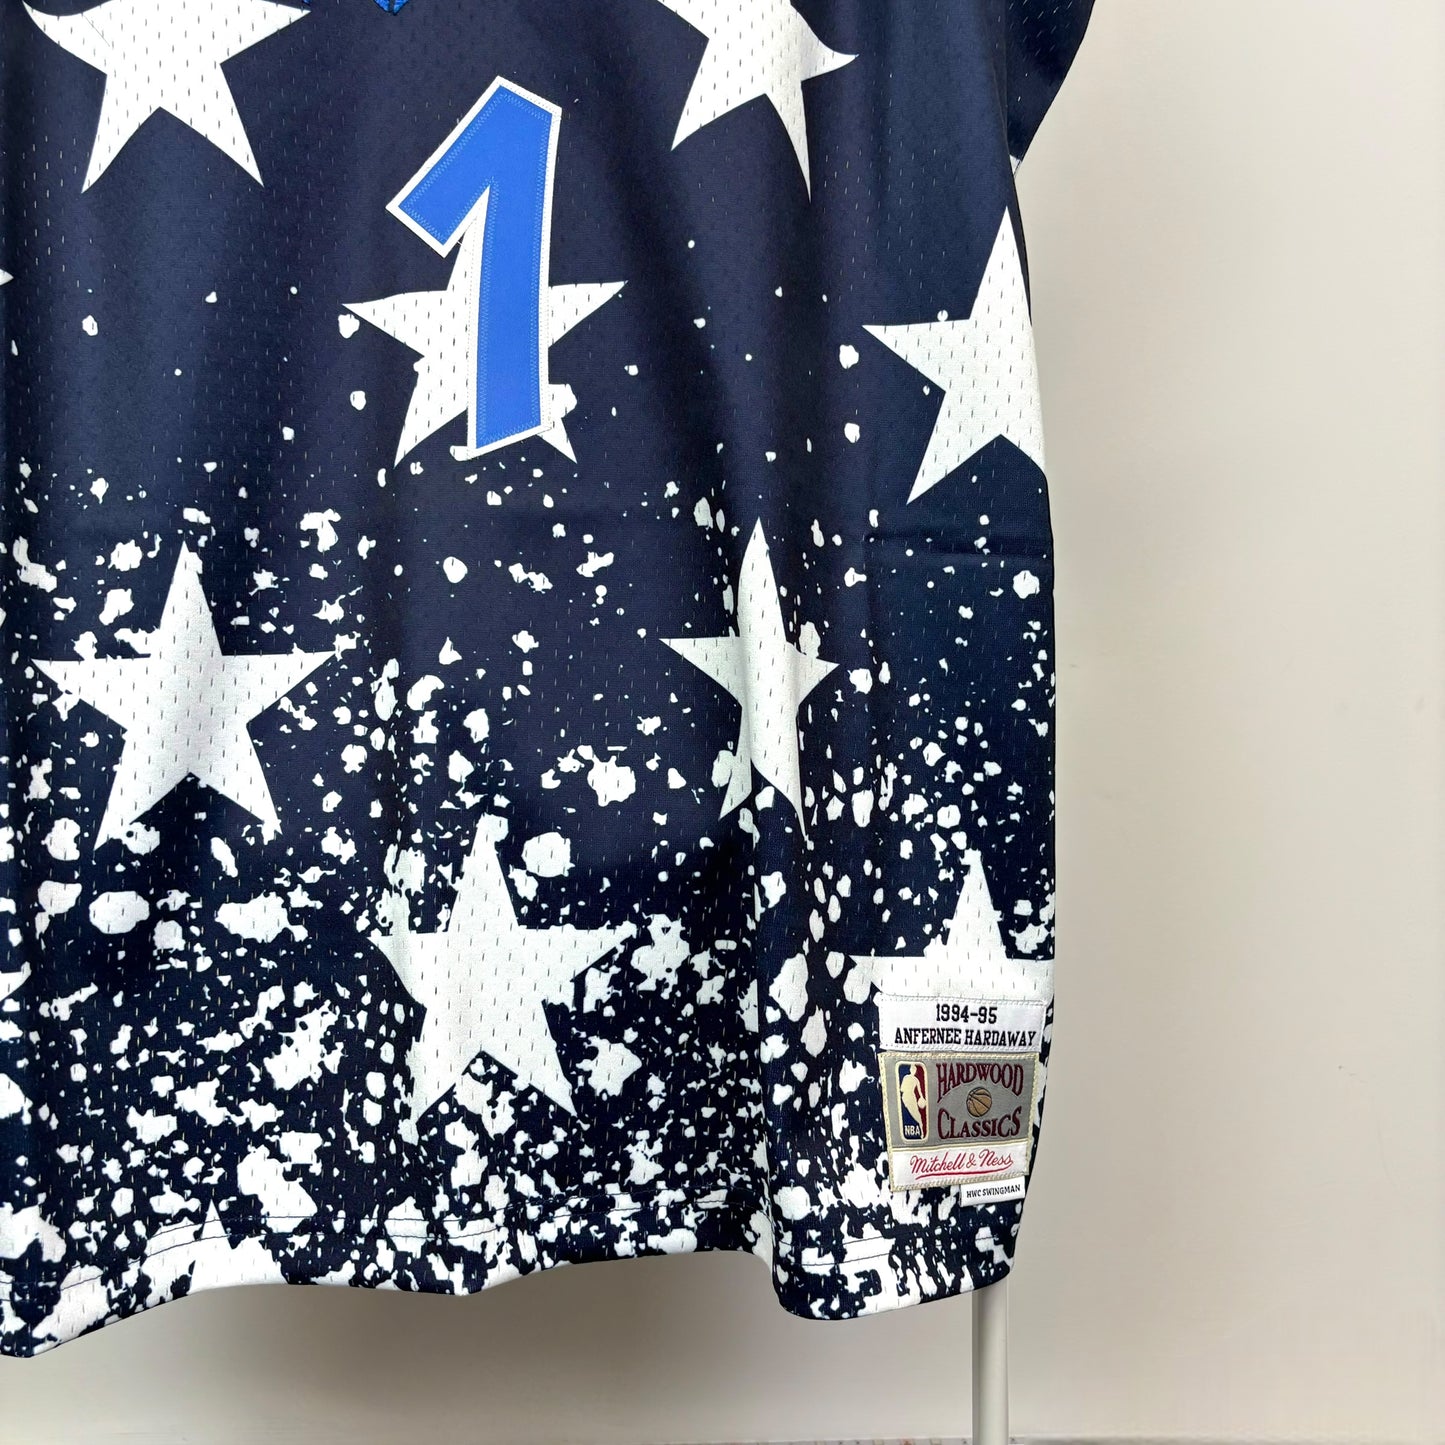 Mitchell & Ness Swingman Orlando Magic "Hardaway" Independence Day Special Edition Jersey